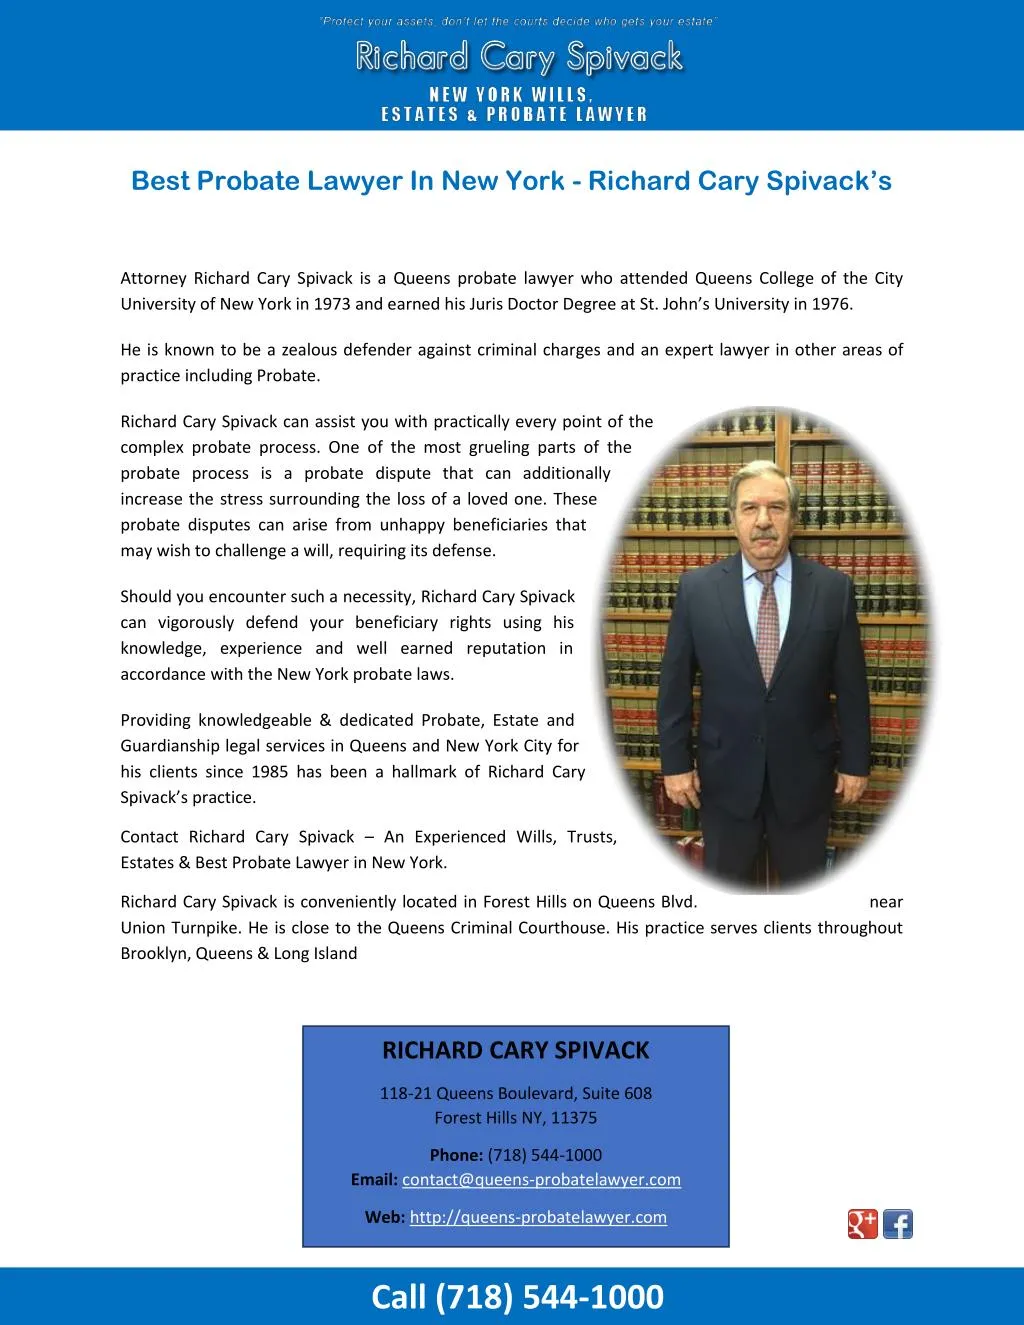 best probate lawyer in new york richard cary